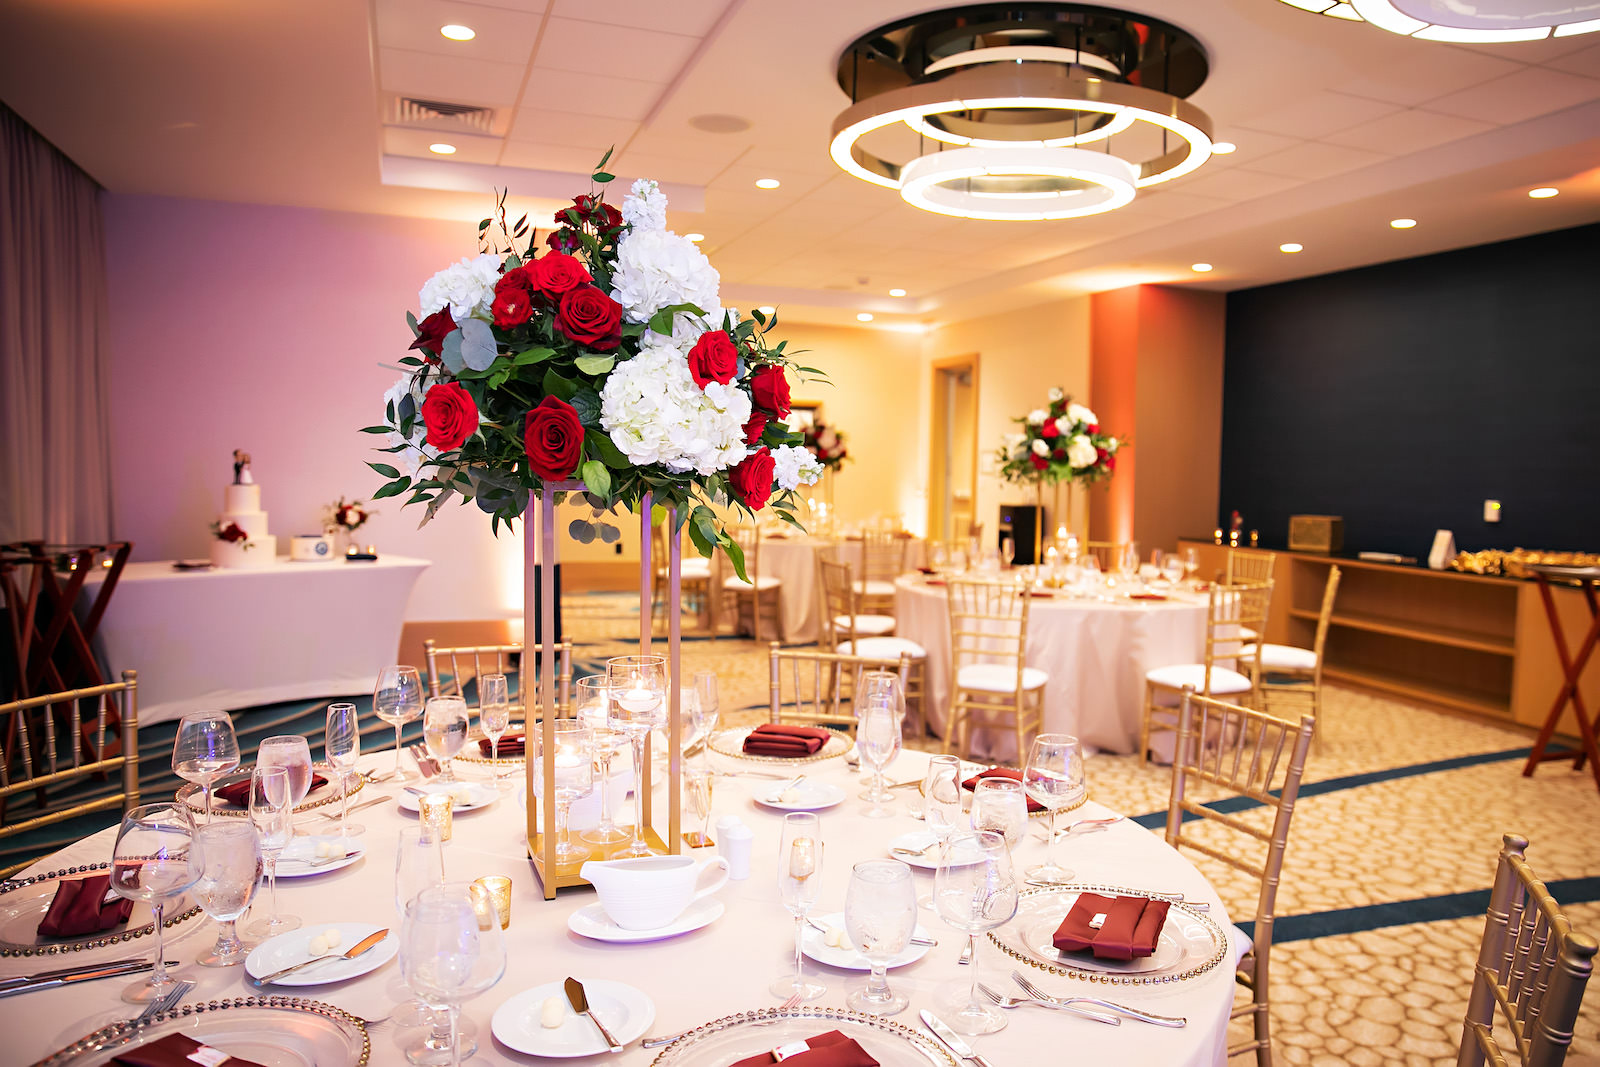 Indoor Hotel Wedding Reception with White Linens and Gold Chairs with Rose Centerpieces | Florida Wedding Venue Wyndham Grand Clearwater Beach | Florida Wedding Rentals Gabro Event Rental Services | Save the Date Florida Wedding Florist